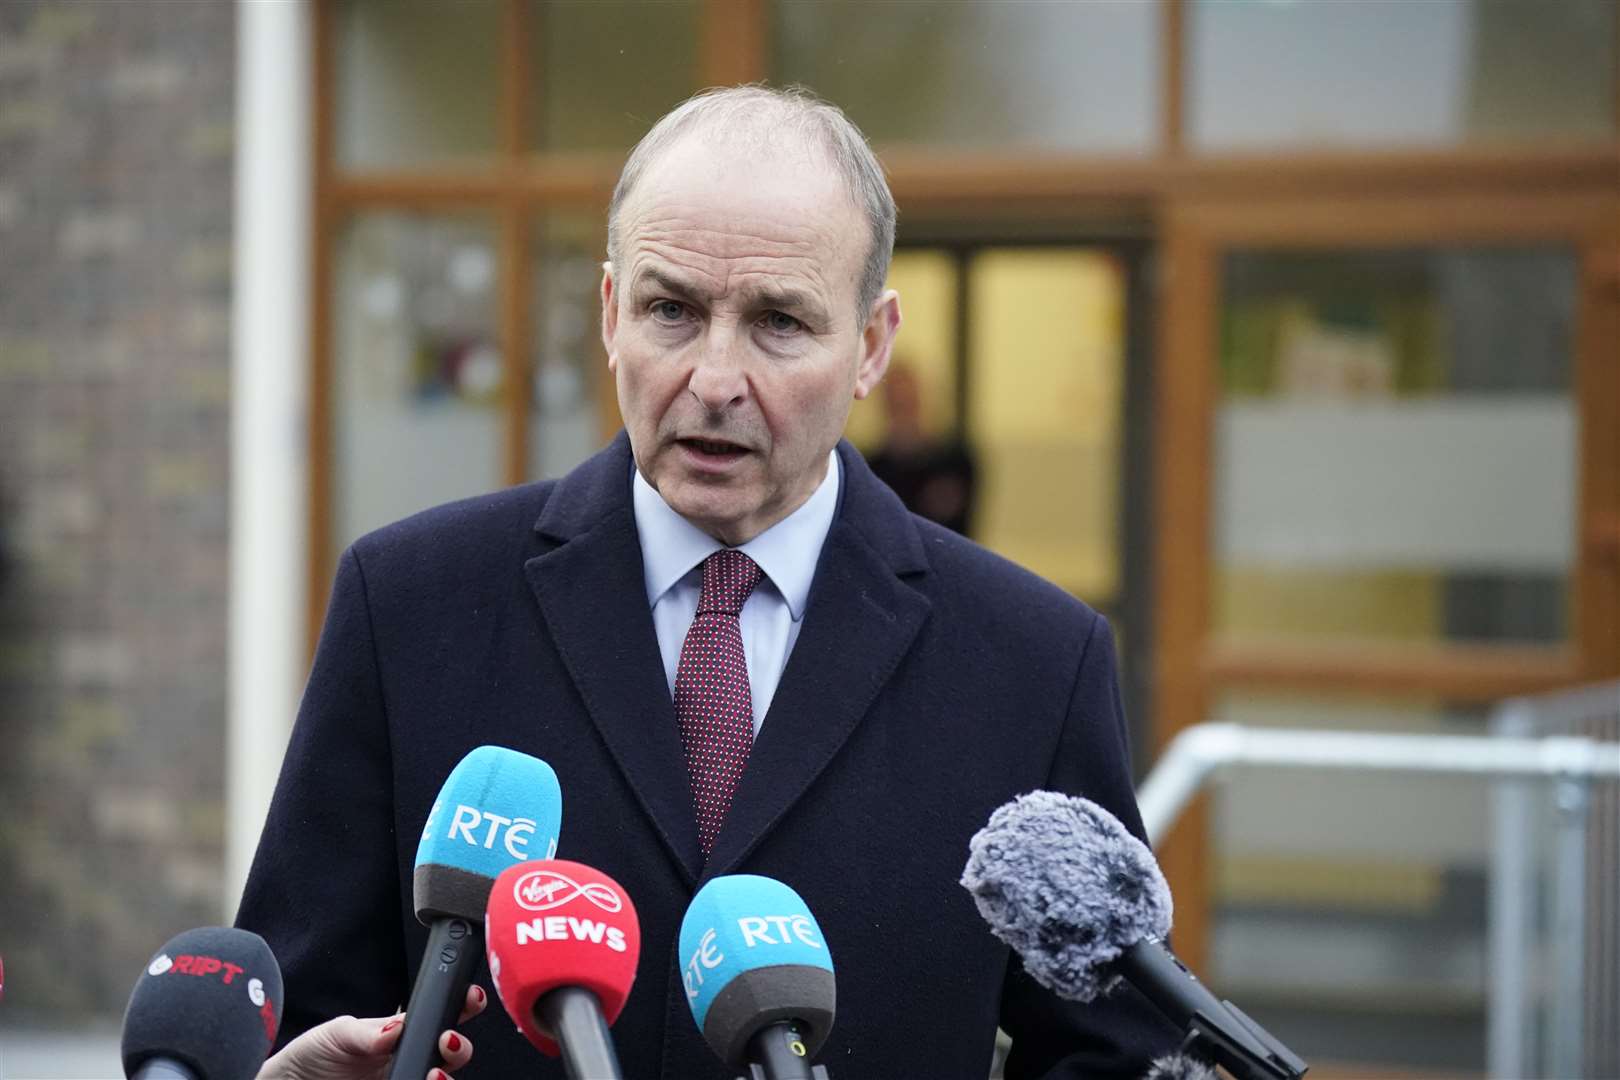 Tanaiste Micheal Martin has said Ireland will ‘strongly consider’ supporting the South African case (Niall Carson/PA)